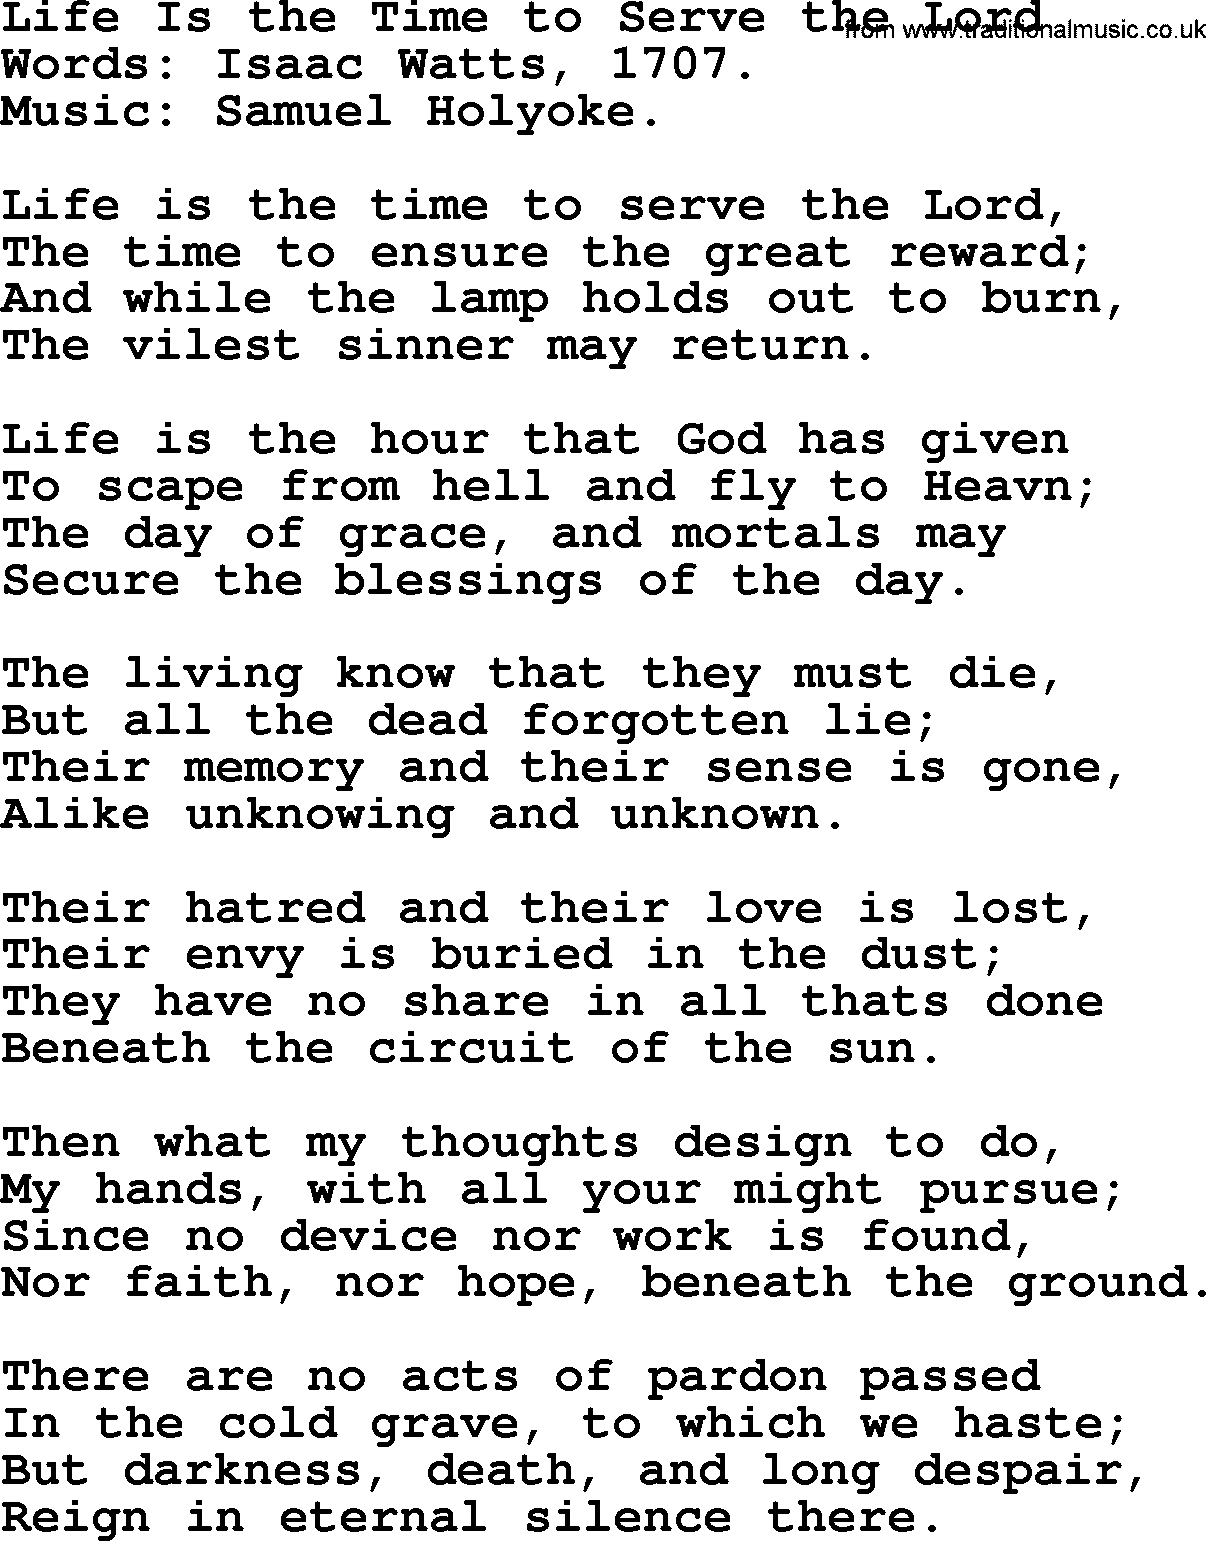 Isaac Watts Christian hymn: Life Is the Time to Serve the Lord- lyricss